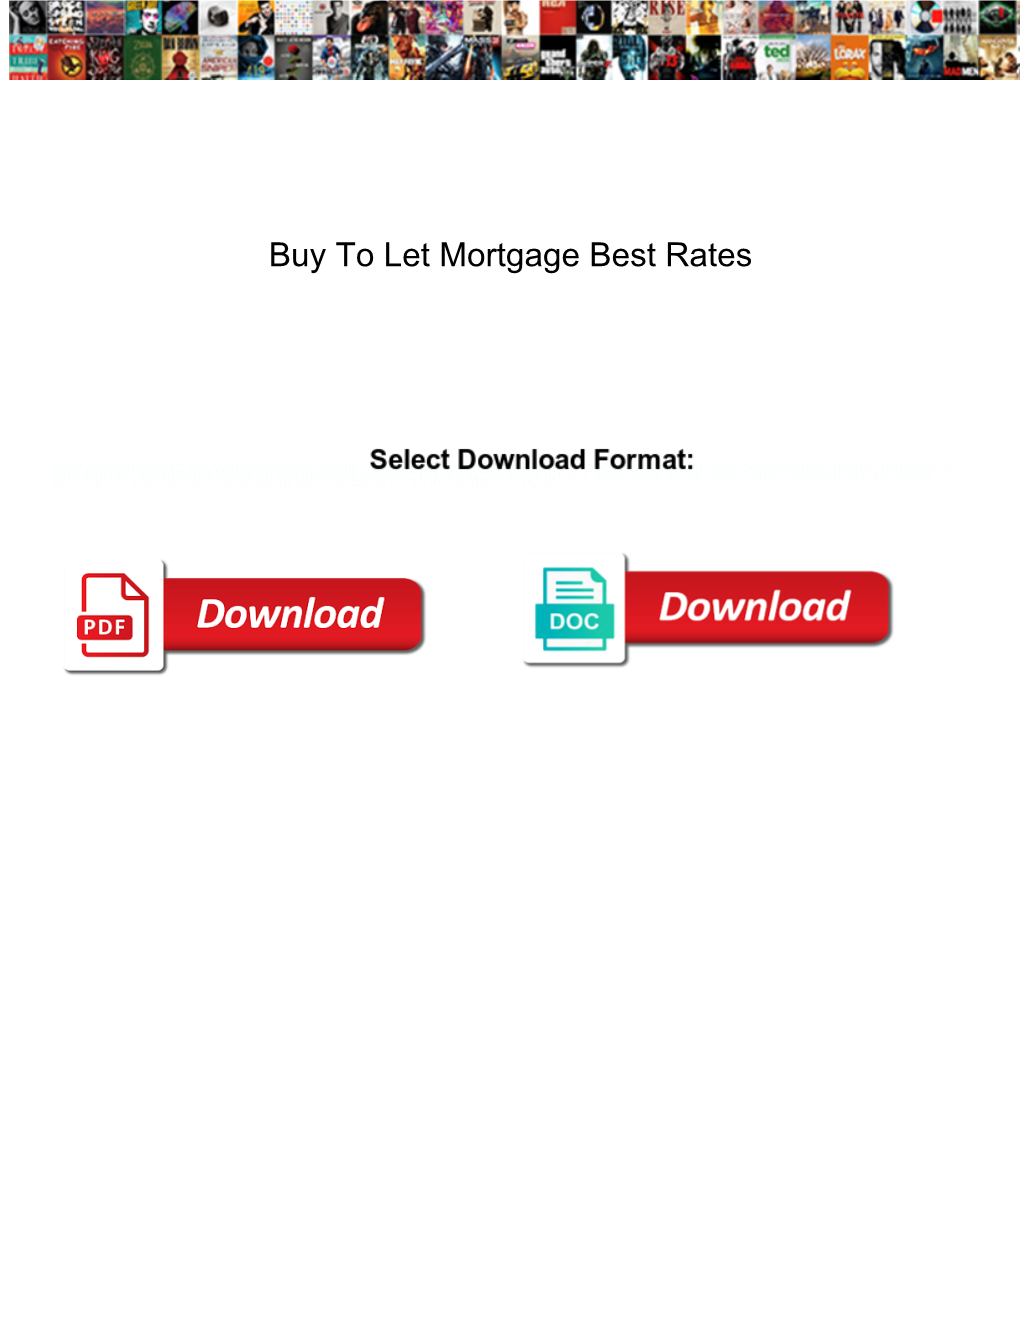 Buy to Let Mortgage Best Rates